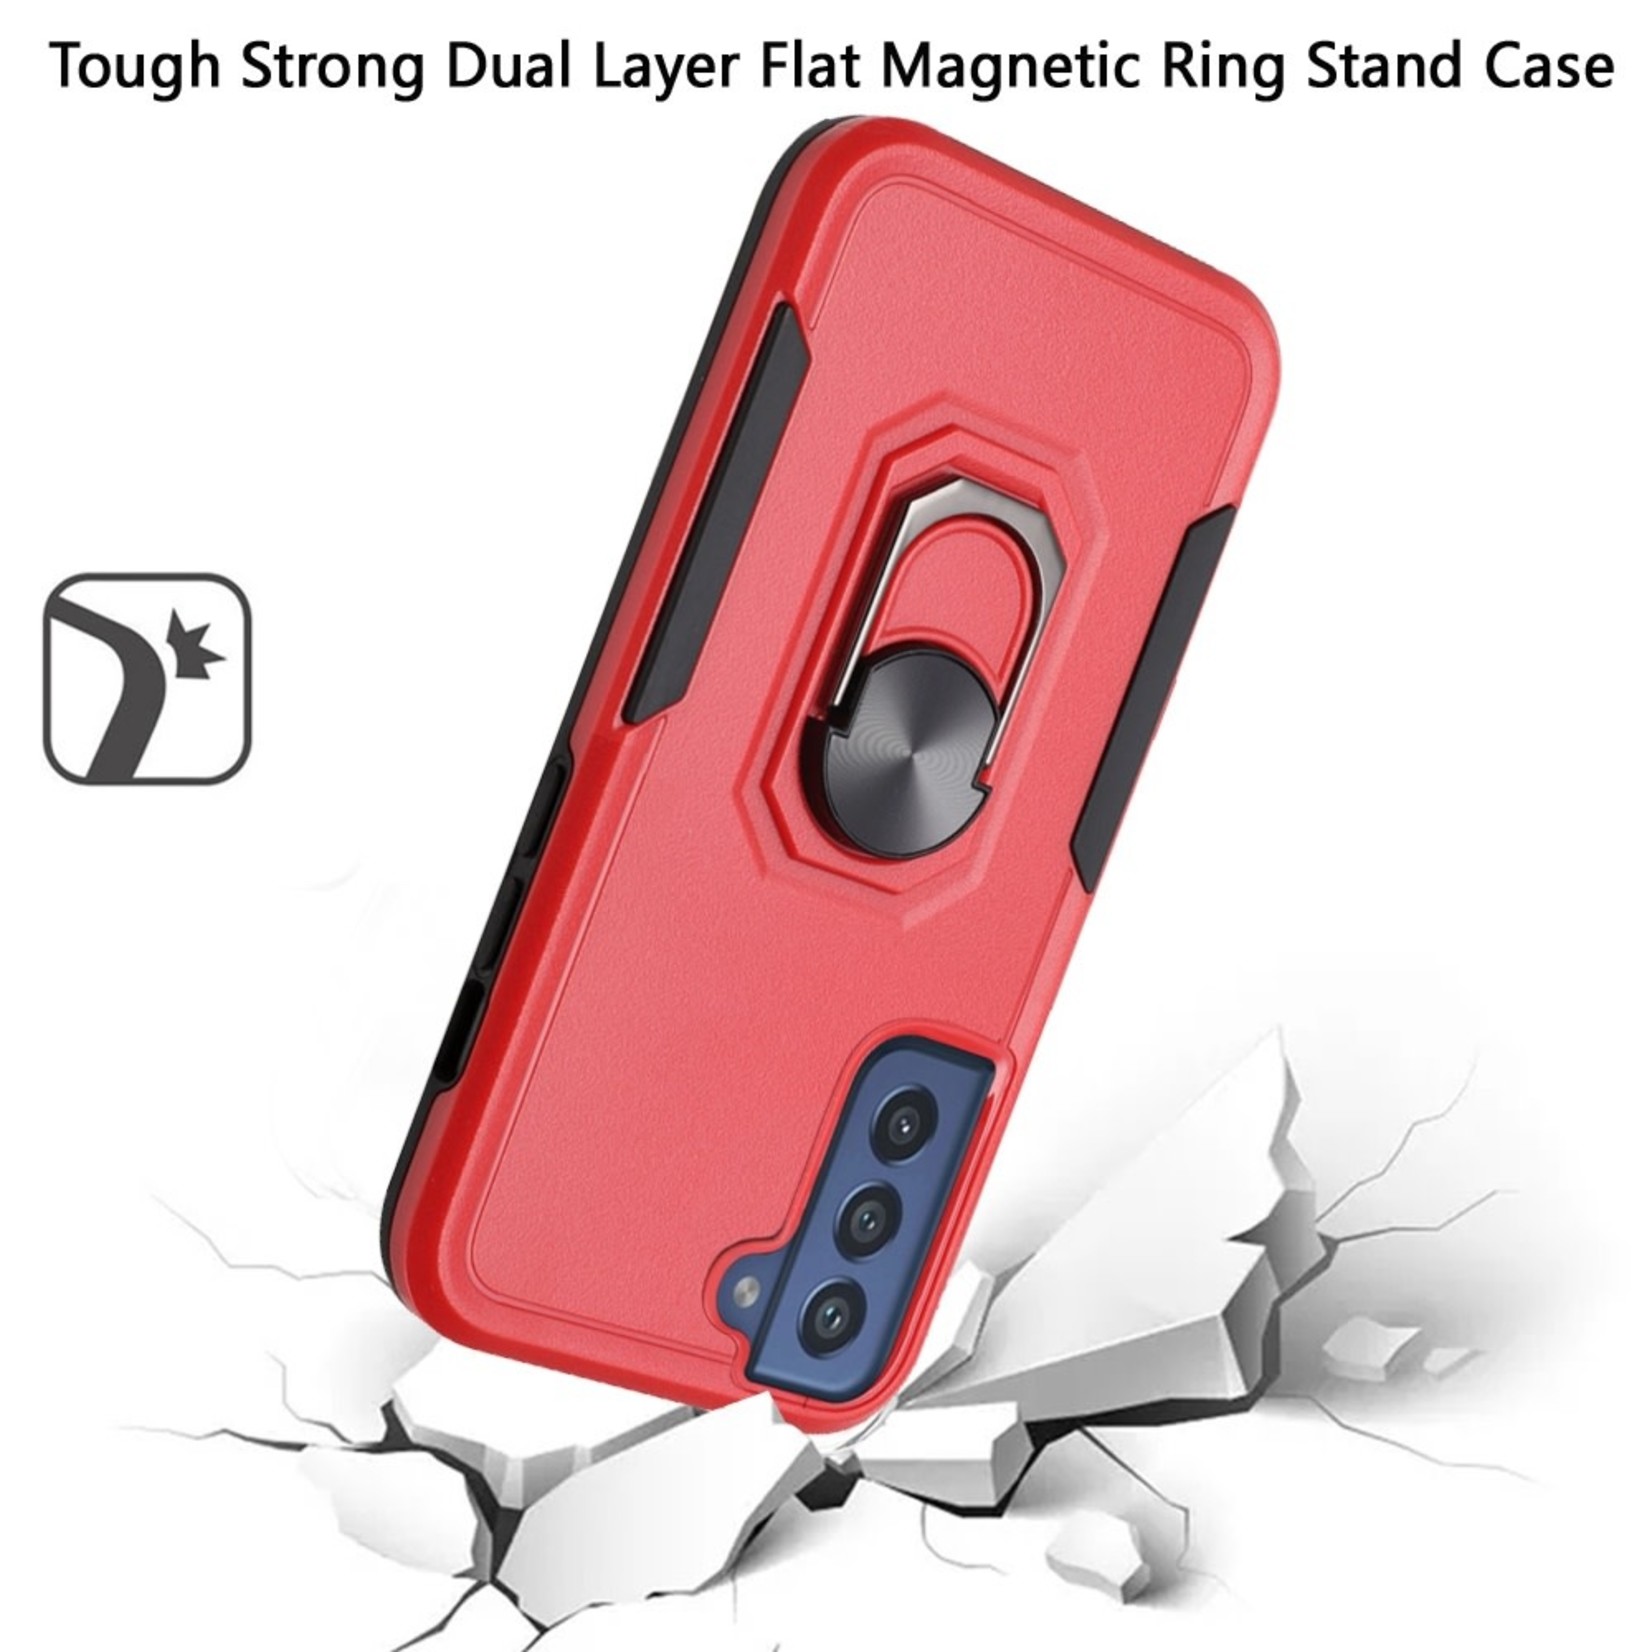 Samsung Tough Strong Dual Layer Flat Magnetic Ring Stand Case Cover - Red For Samsung Galaxy S22 Plus